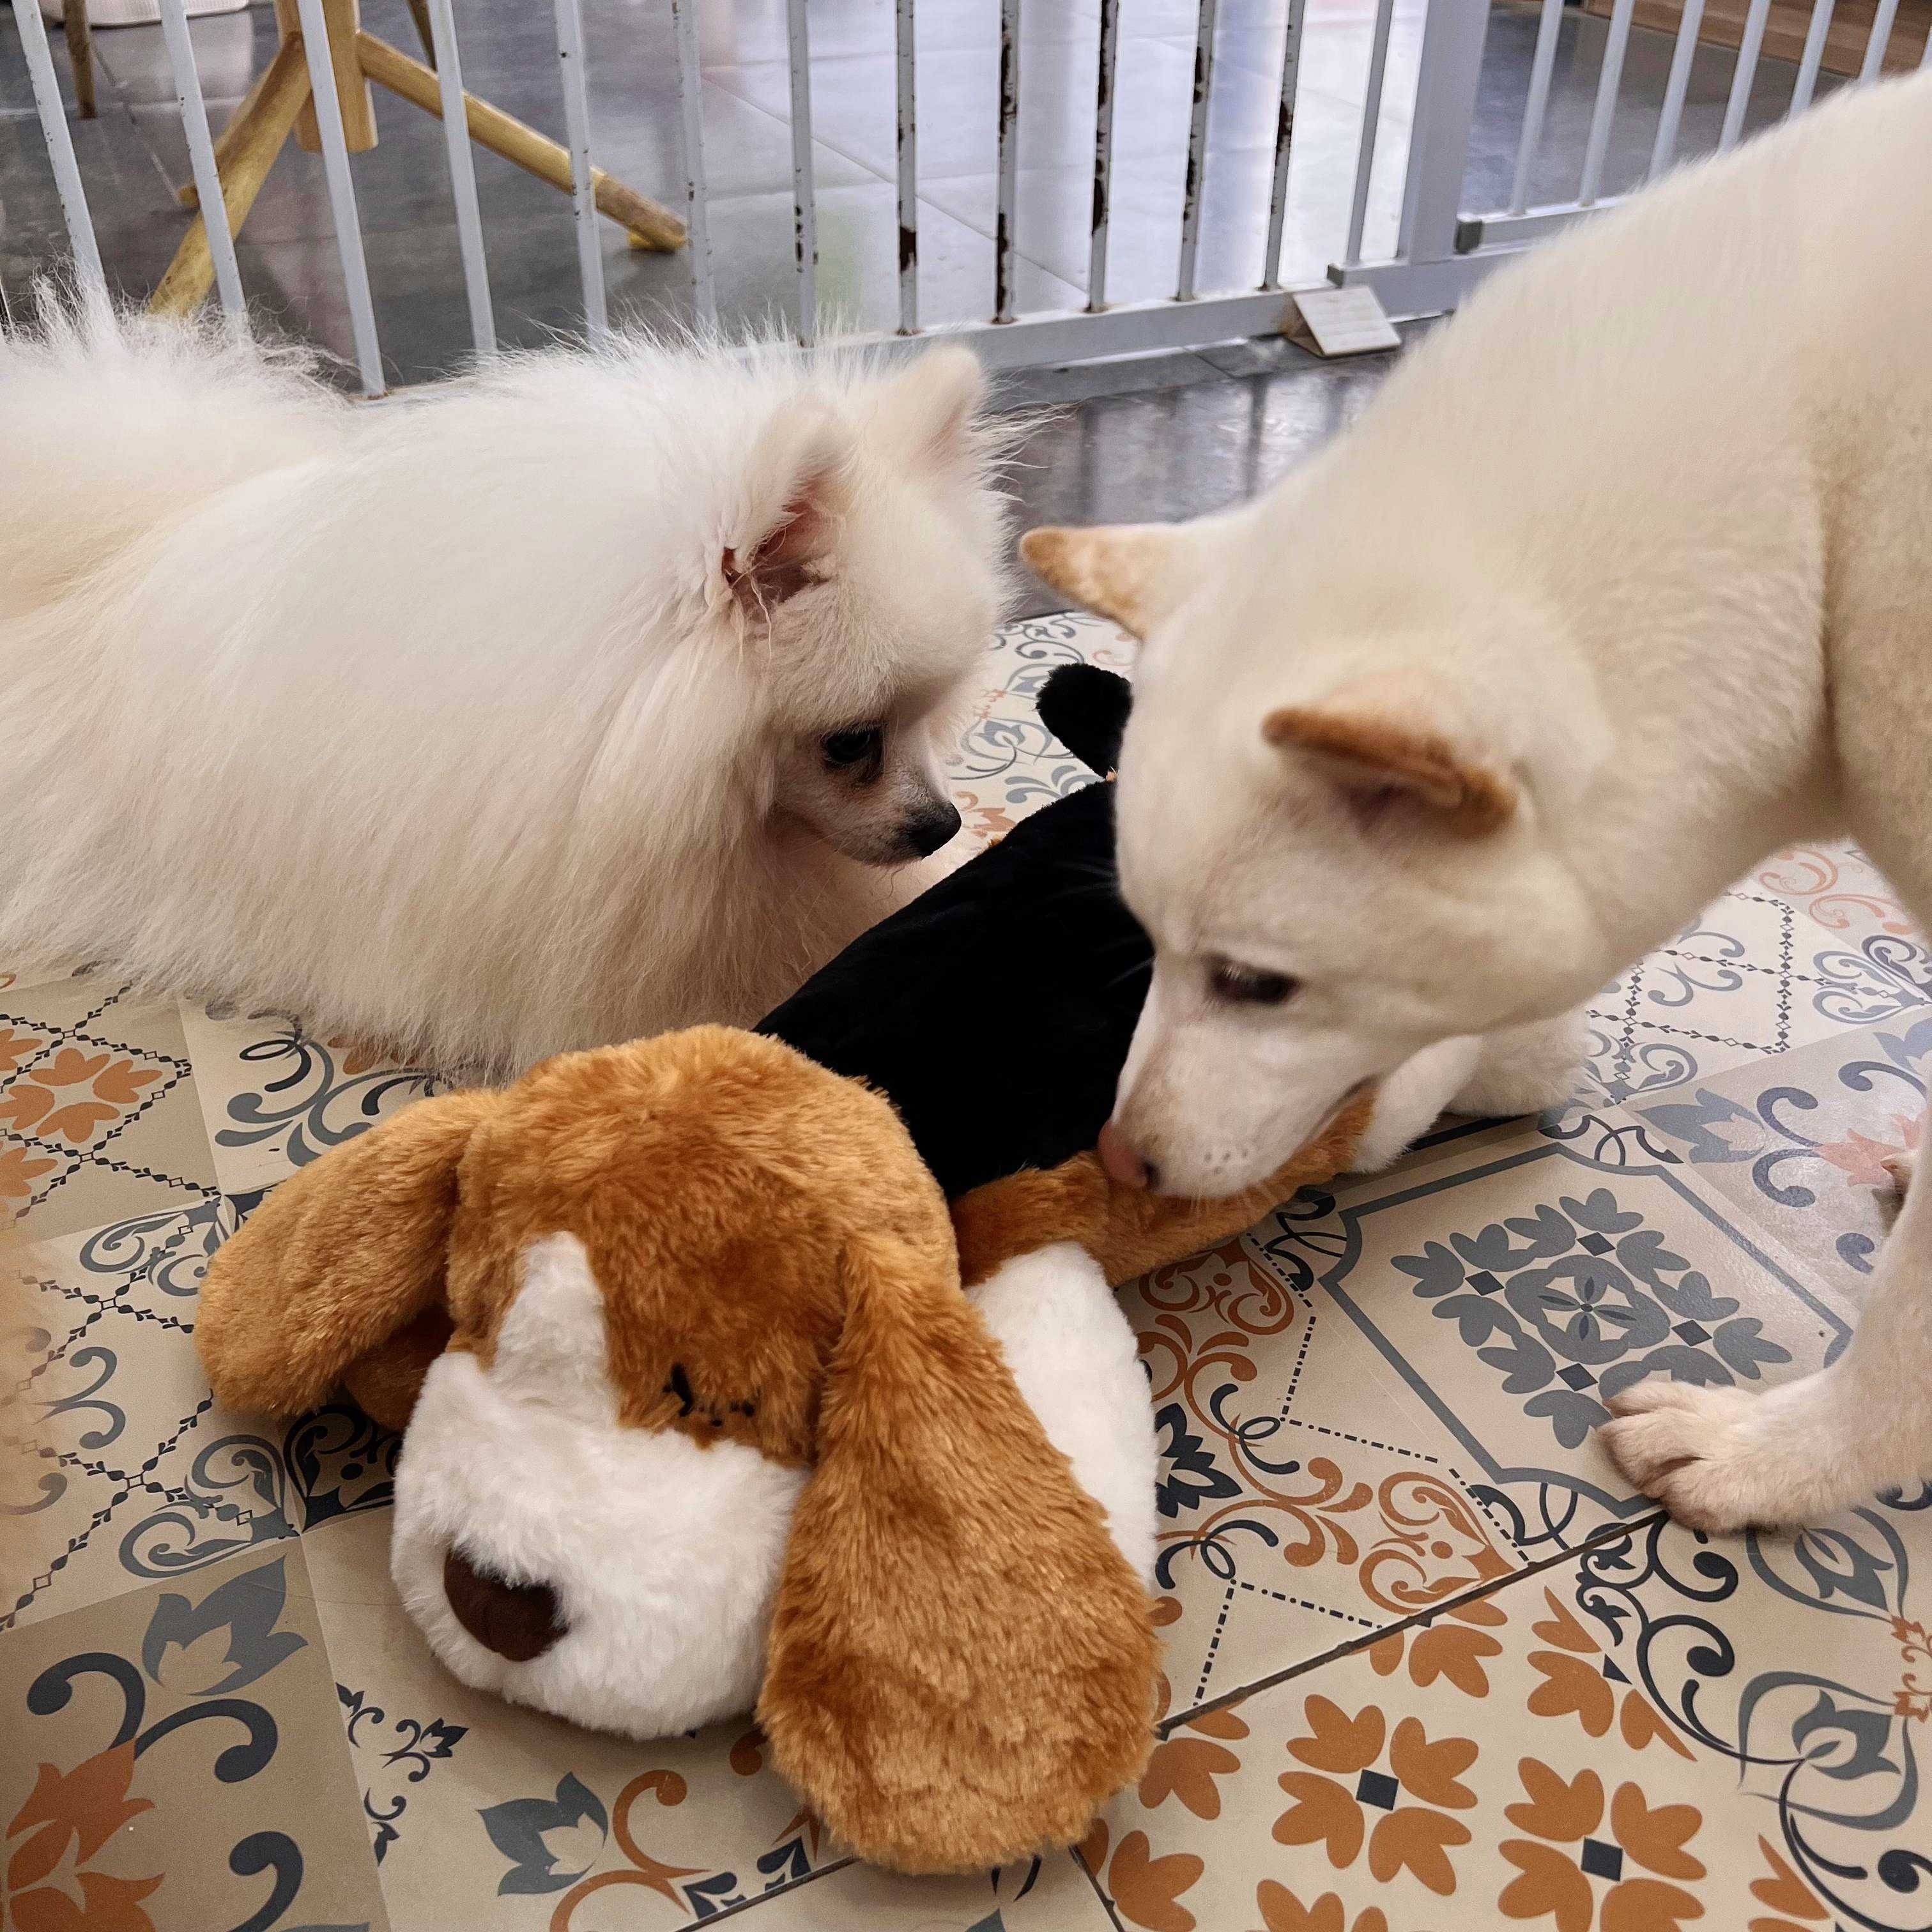 Samoyed and Cloud Plush Toy Pillows